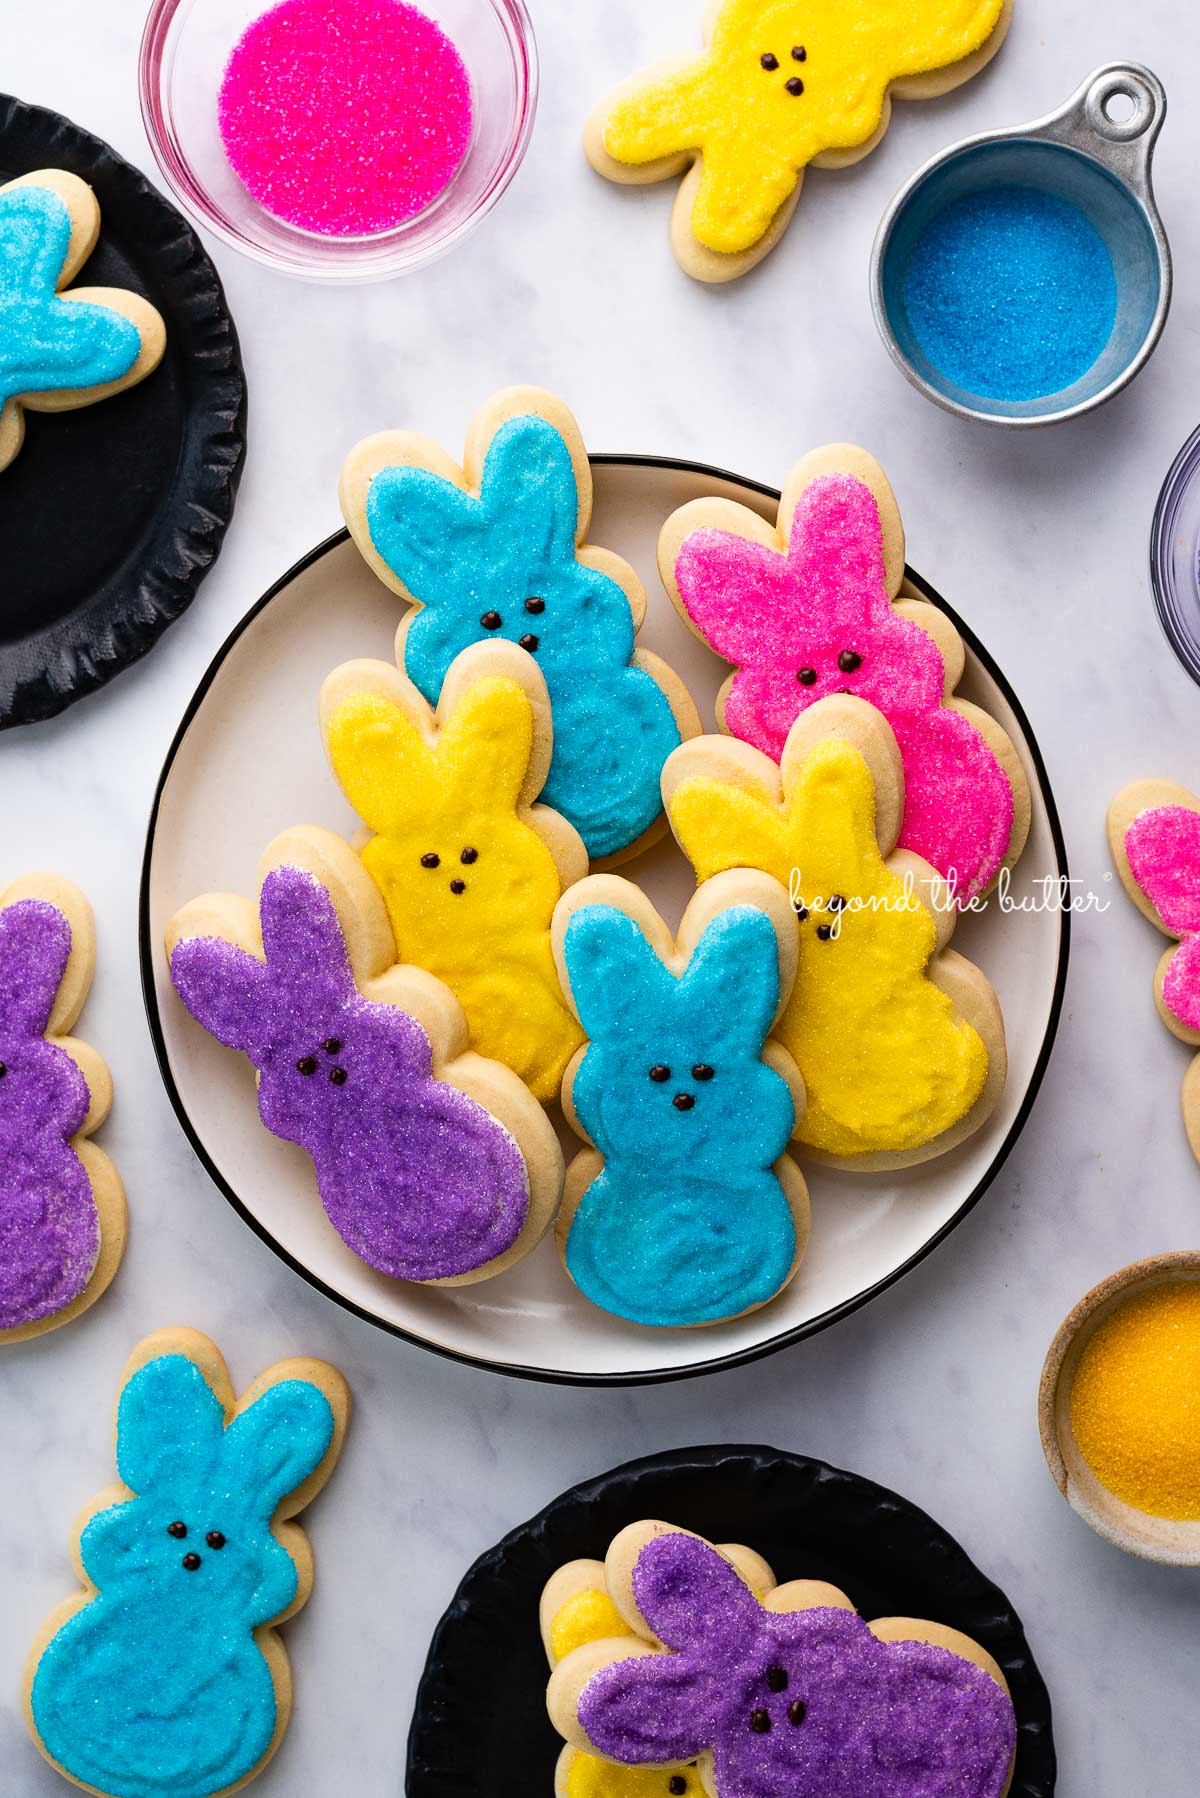 Plate full of Easter bunny cut out sugar cookies decorated in purple, pink, blue, and yellow sanding sugars with chocolate dots for eyes and noses on whie marbled background | © Beyond the Butter®